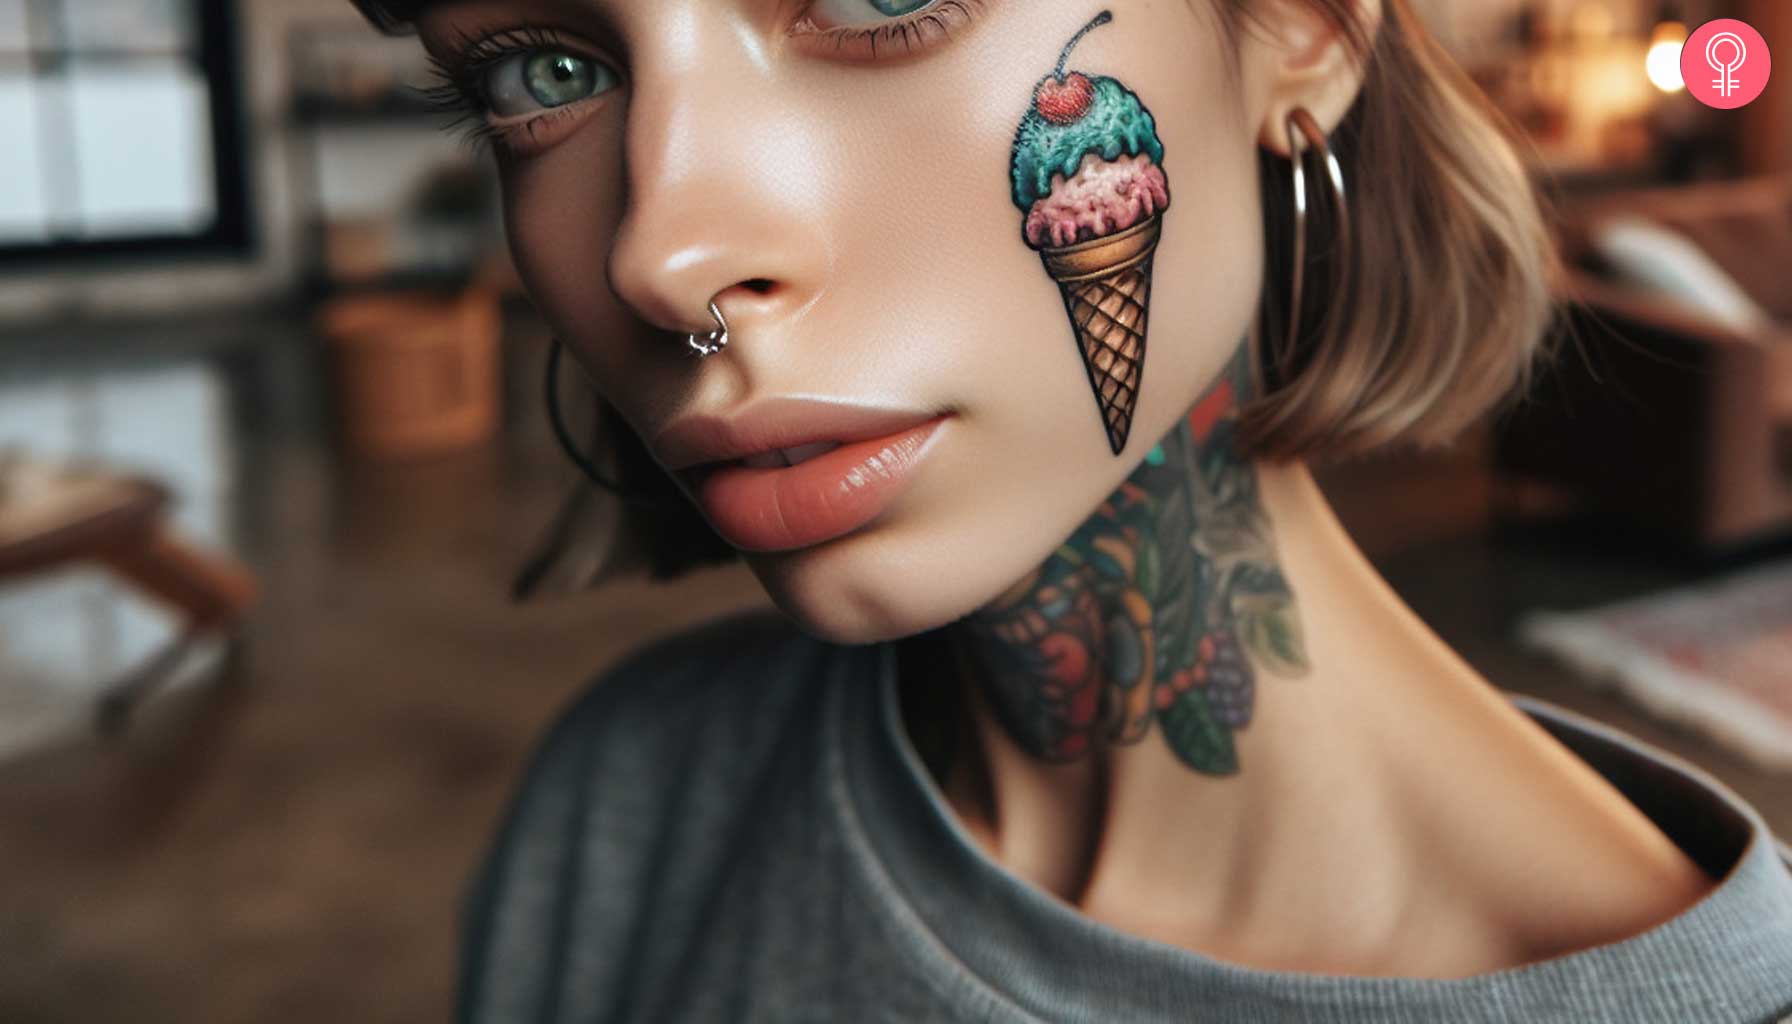 A woman flaunting an ice cream tattoo on her cheeks